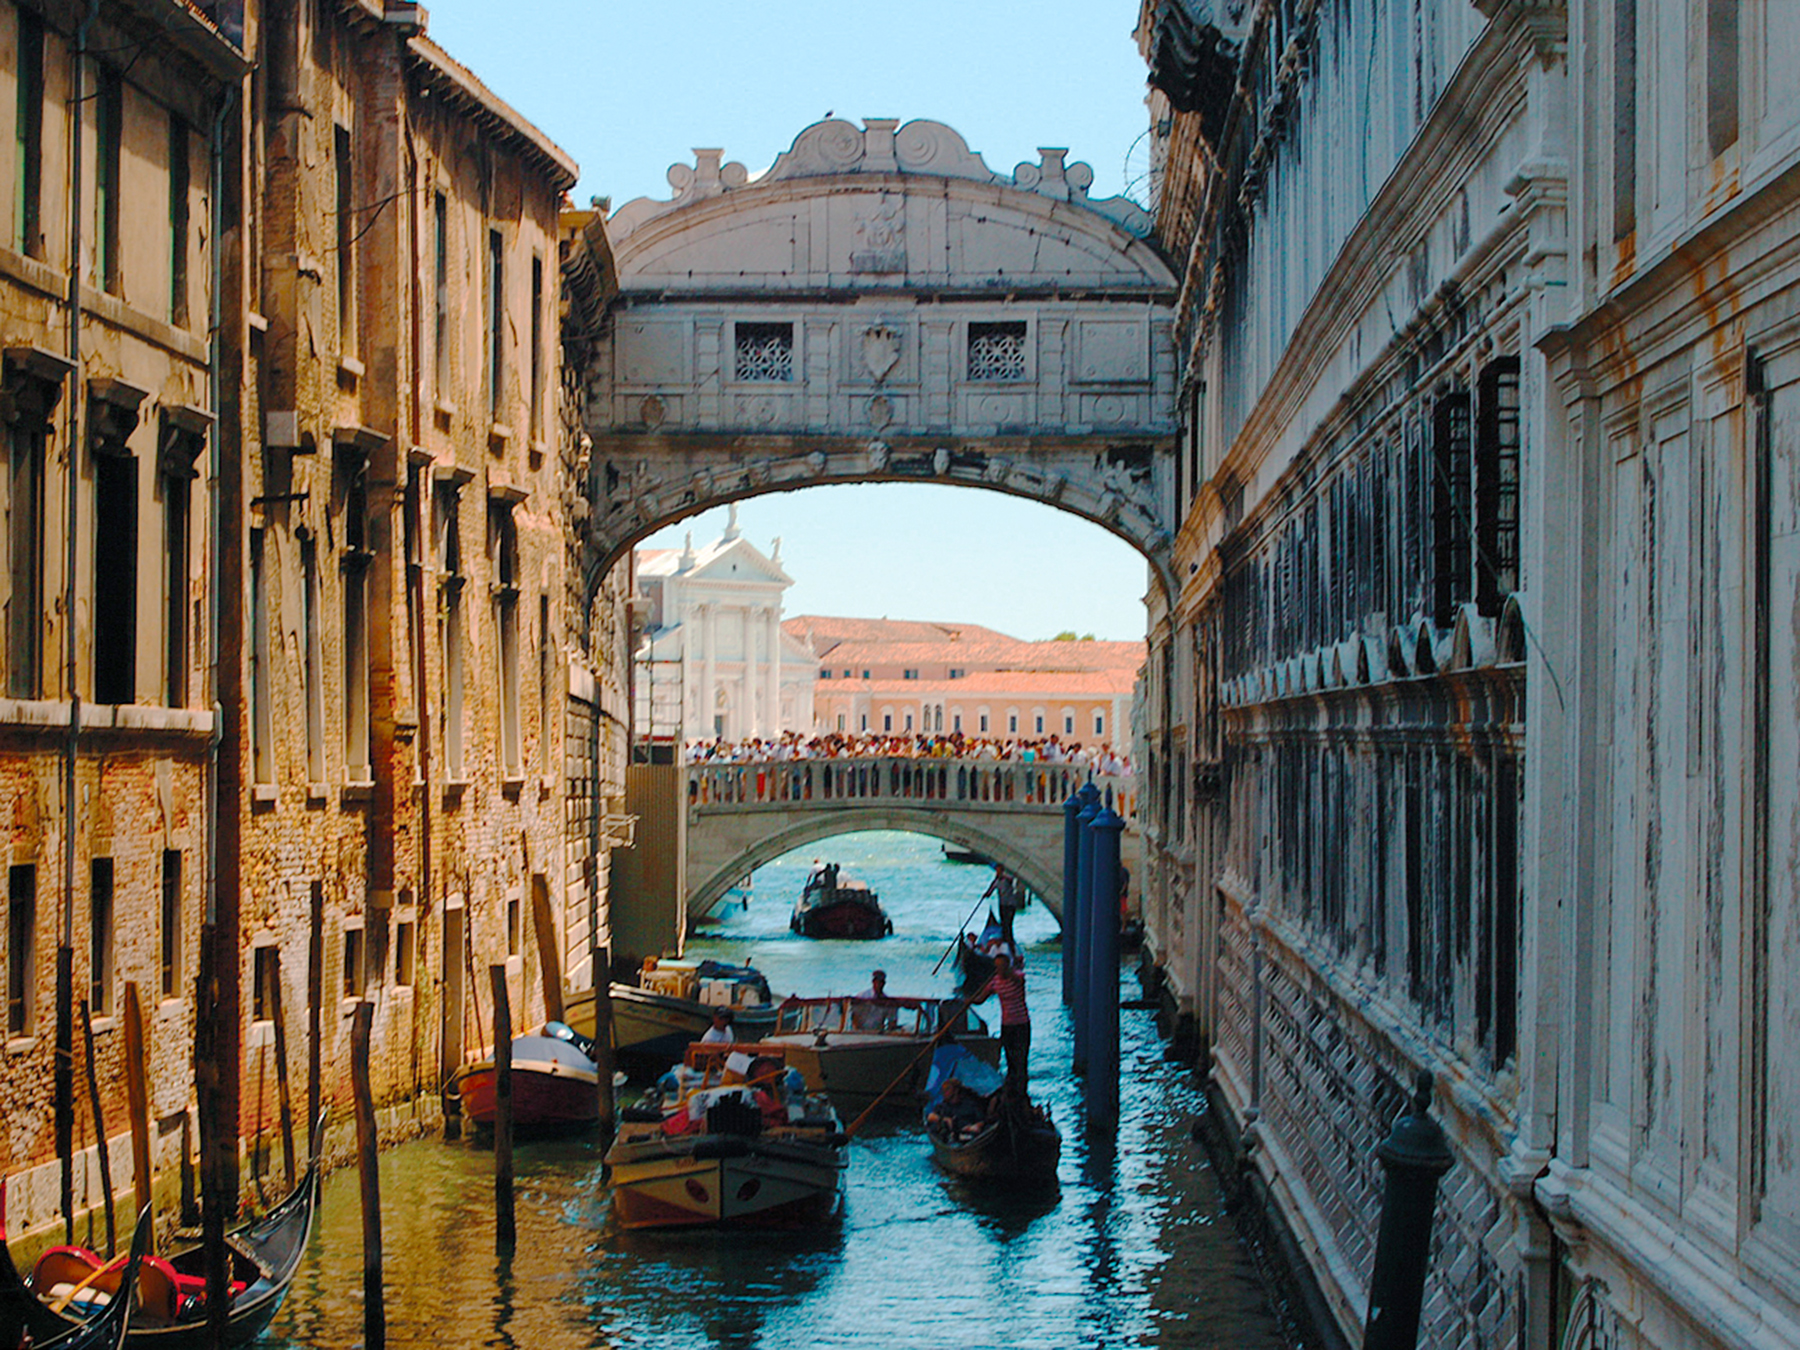 Cầu Than Thở - The Bridge of Sighs | Yeudulich